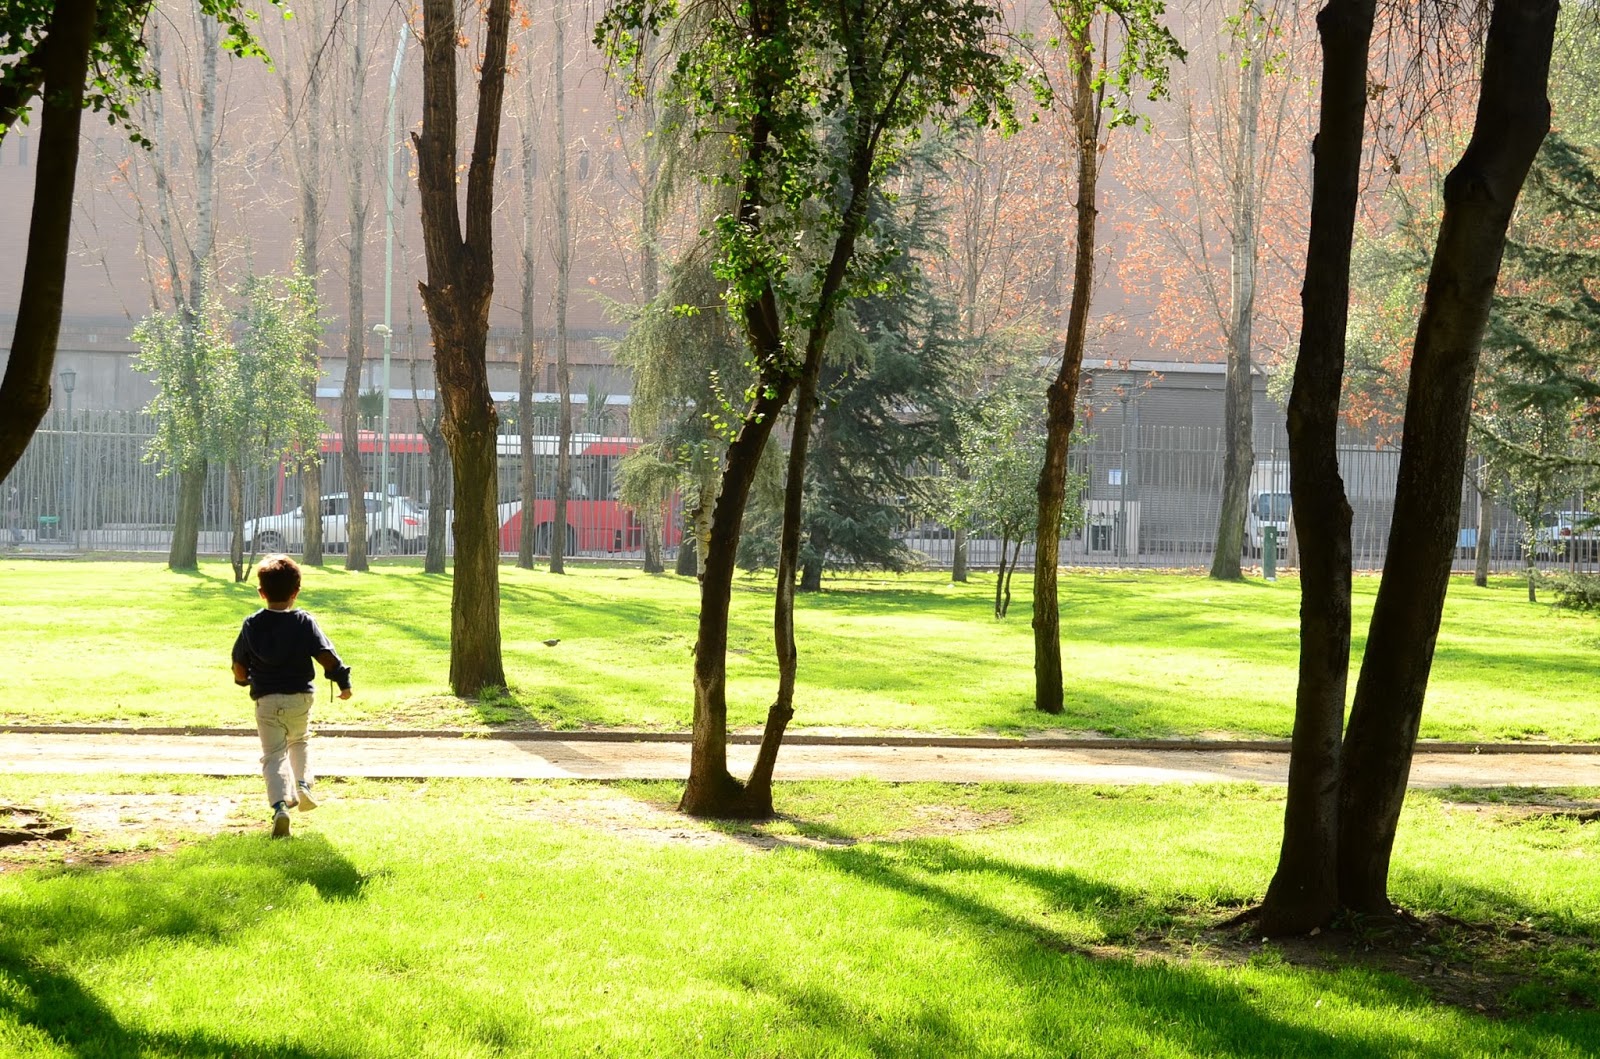 The Practical Mom: Child friendly Chile: Restrooms, Creches, Parks & Zoos in Santiago